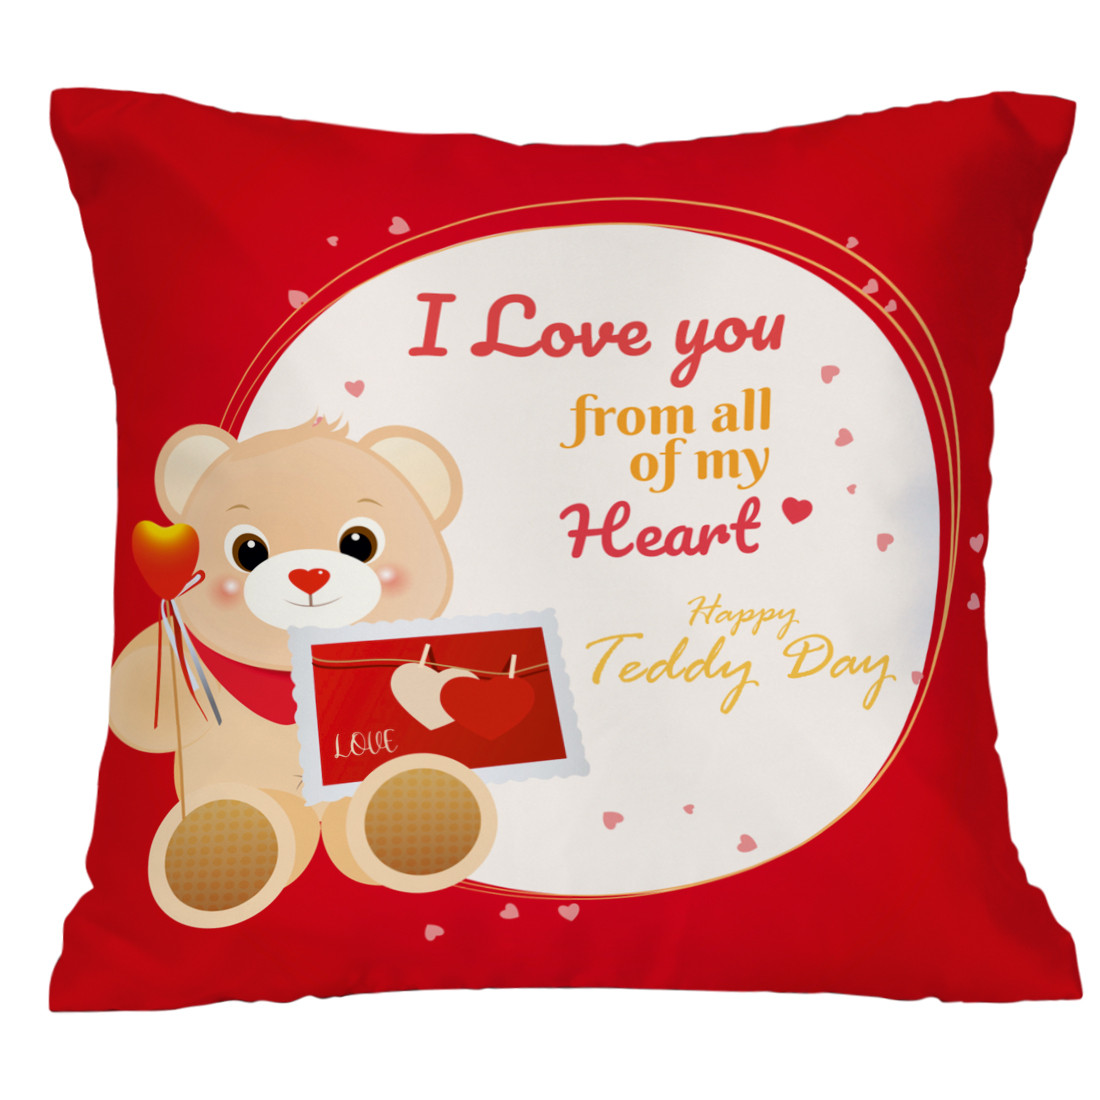 Buy ME & YOU Valentines Day Unique Gift for Girlfriend/Boyfriend|Romantic  Gift for Valentine's Week|Teddy Day, Propose Day Gift|Anniversary, Birthday  Gift|Printed Cushion(12 * 12ich) Online at Low Prices in India - Amazon.in